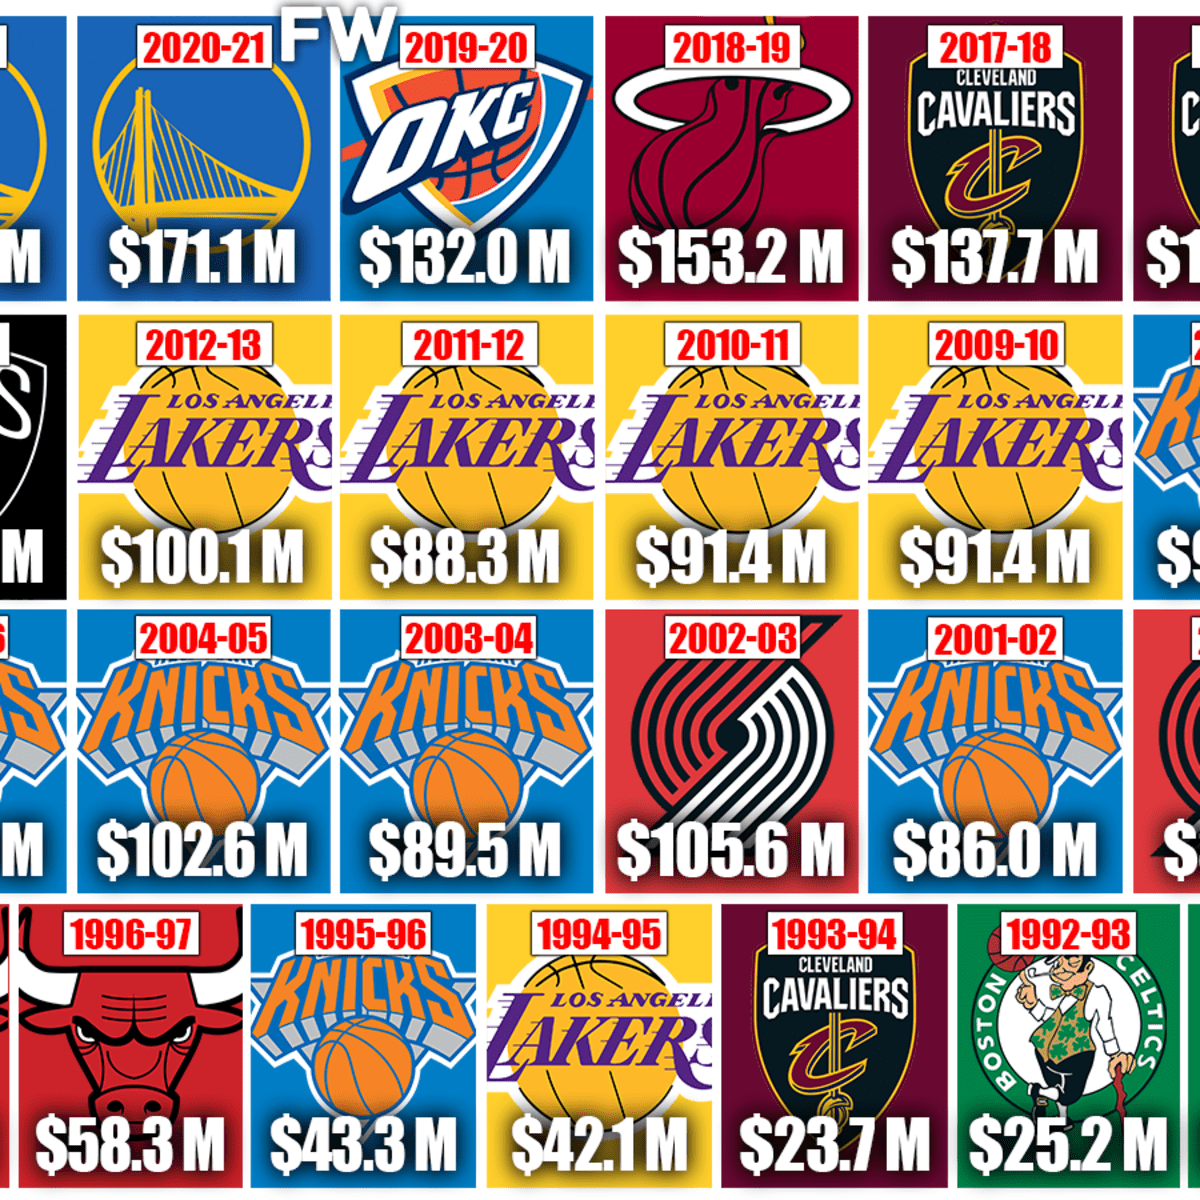 Ranking All 30 NBA Franchises From 2000-01 to 2015-16 Using